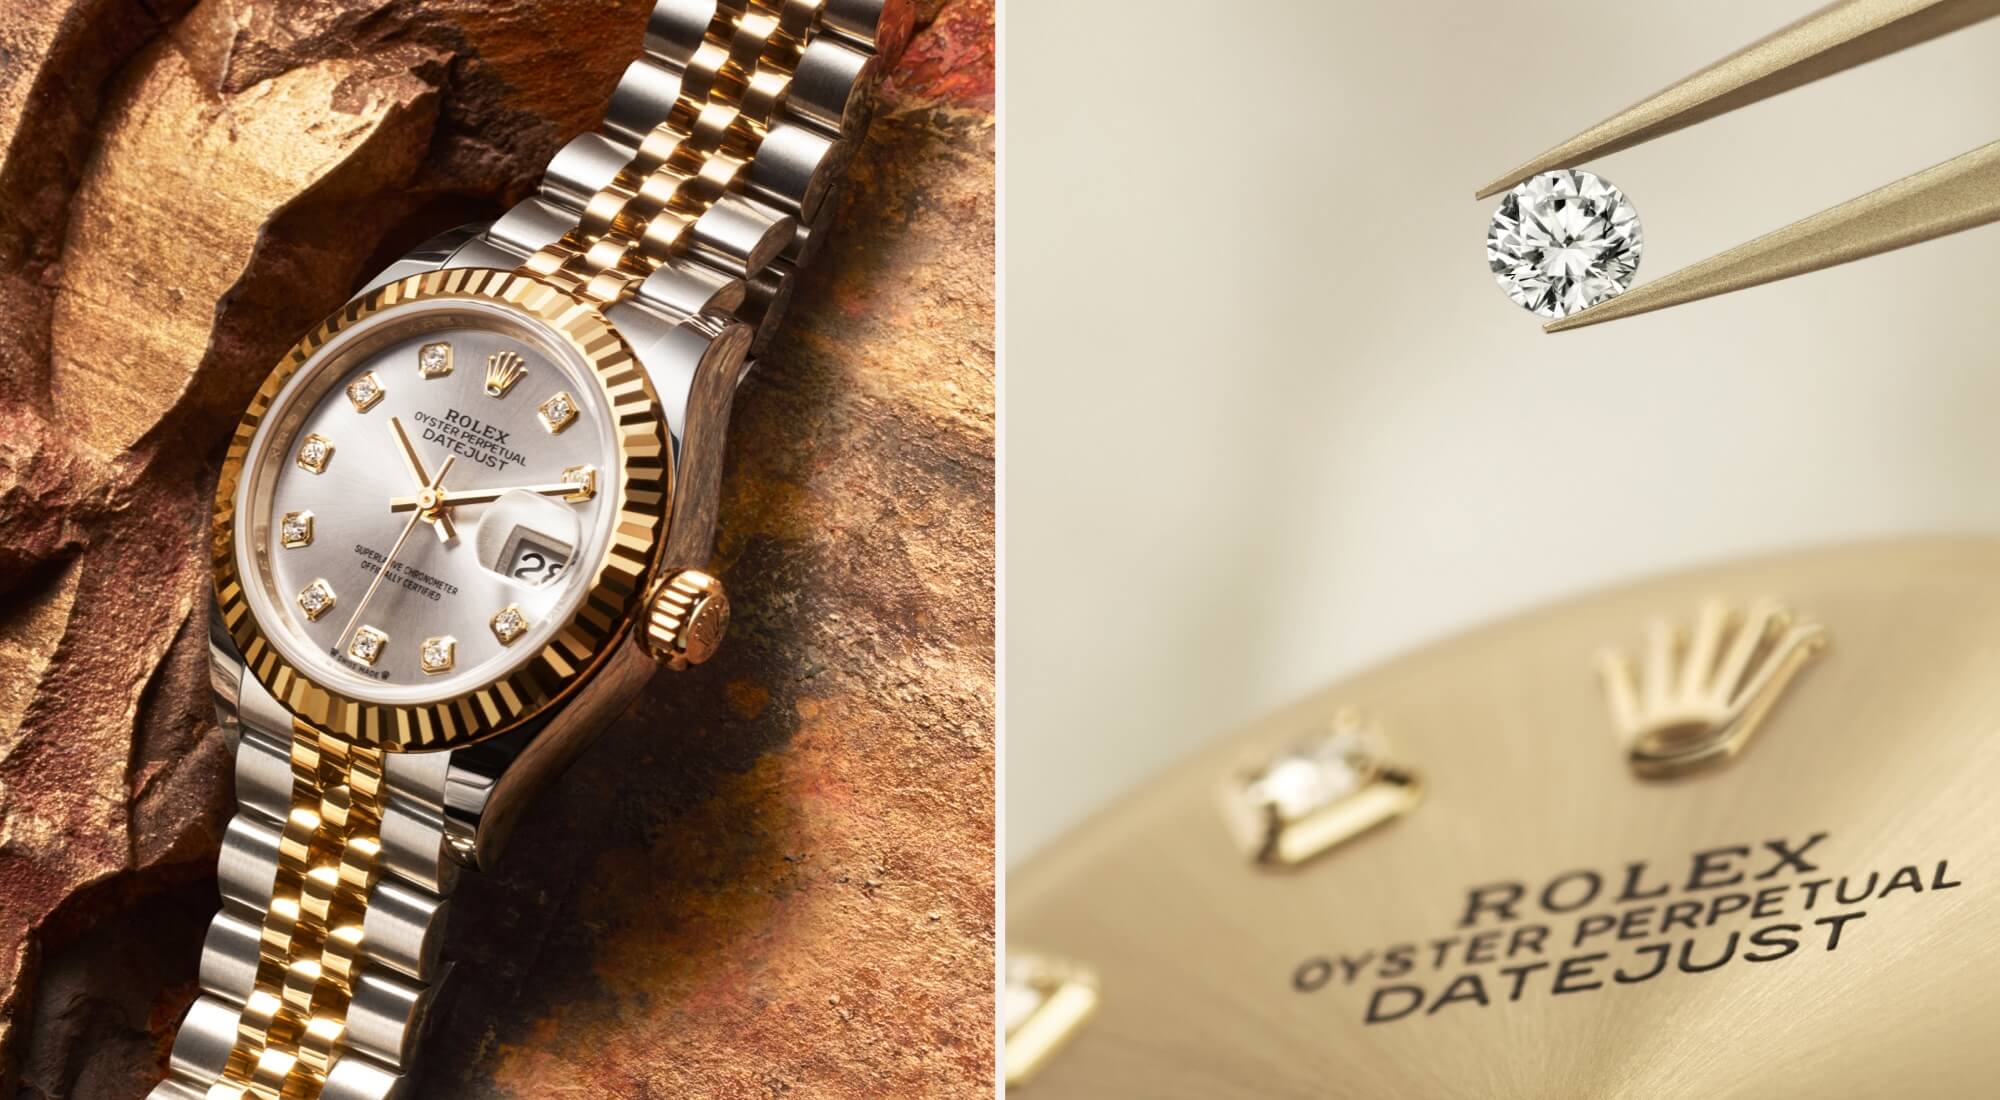 rolex lady datejust watches - global watch company